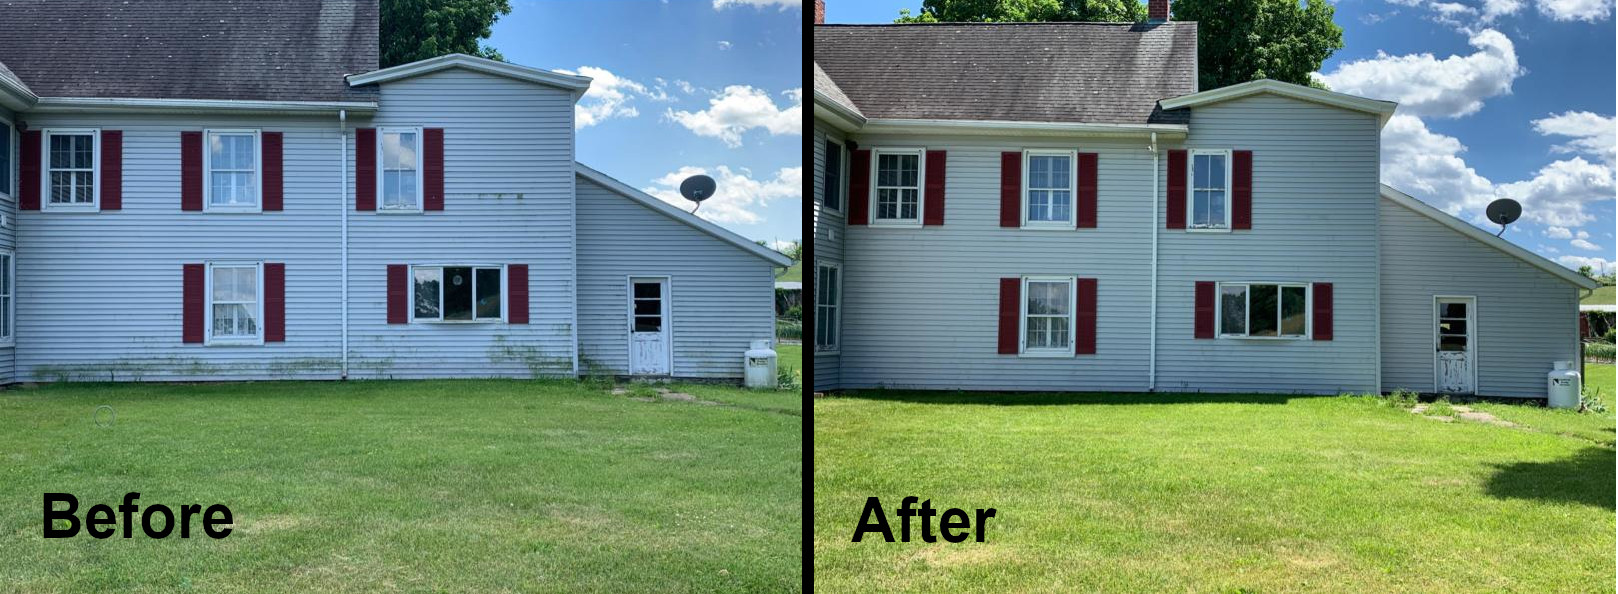 Soft wash siding warwick before and after